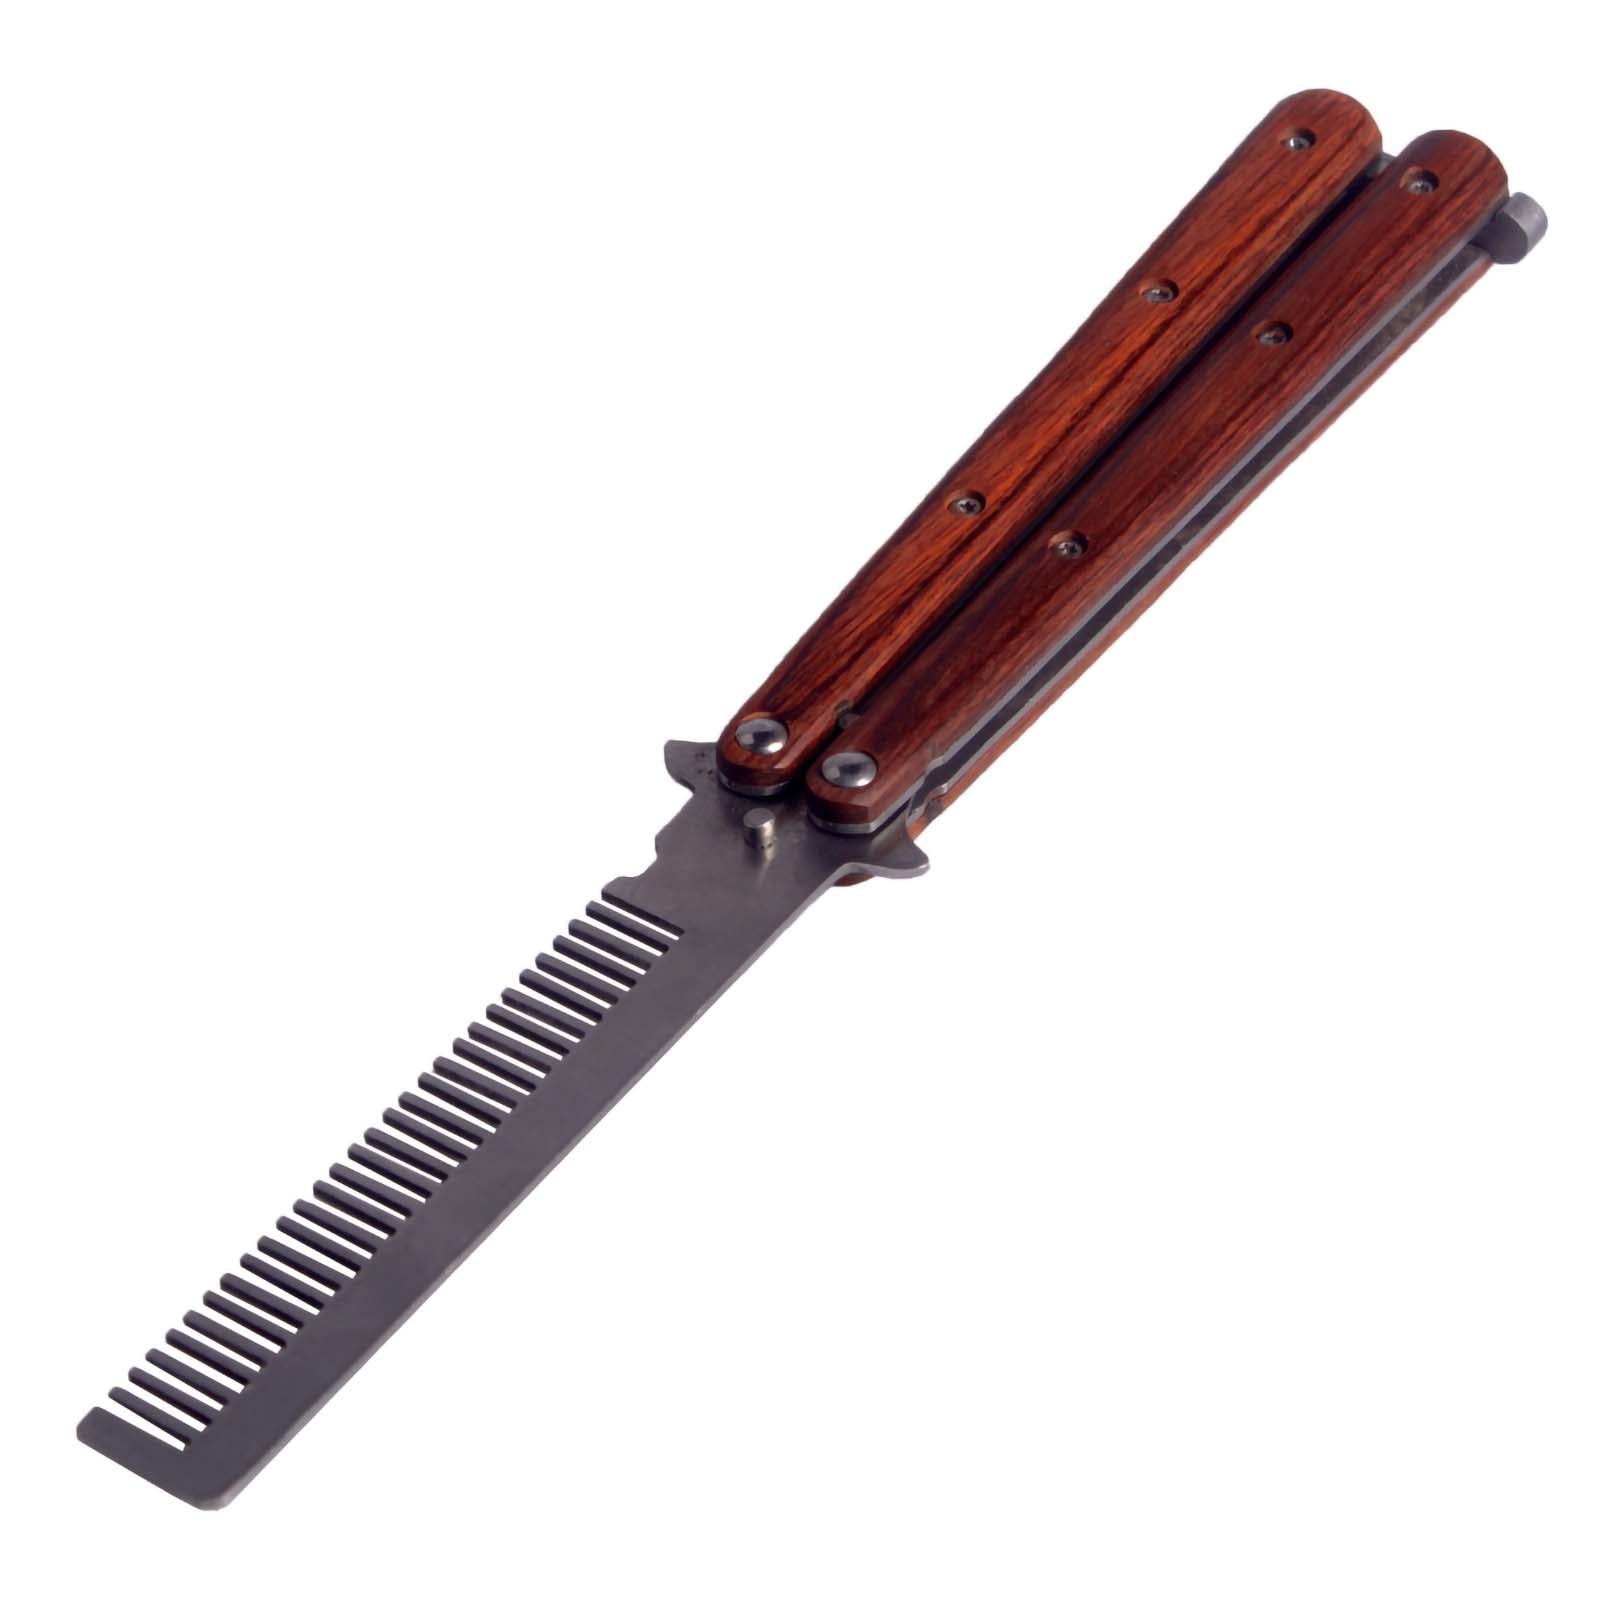 Andux Butterfly Knife Comb Style Wooden Handle CS/HDD10